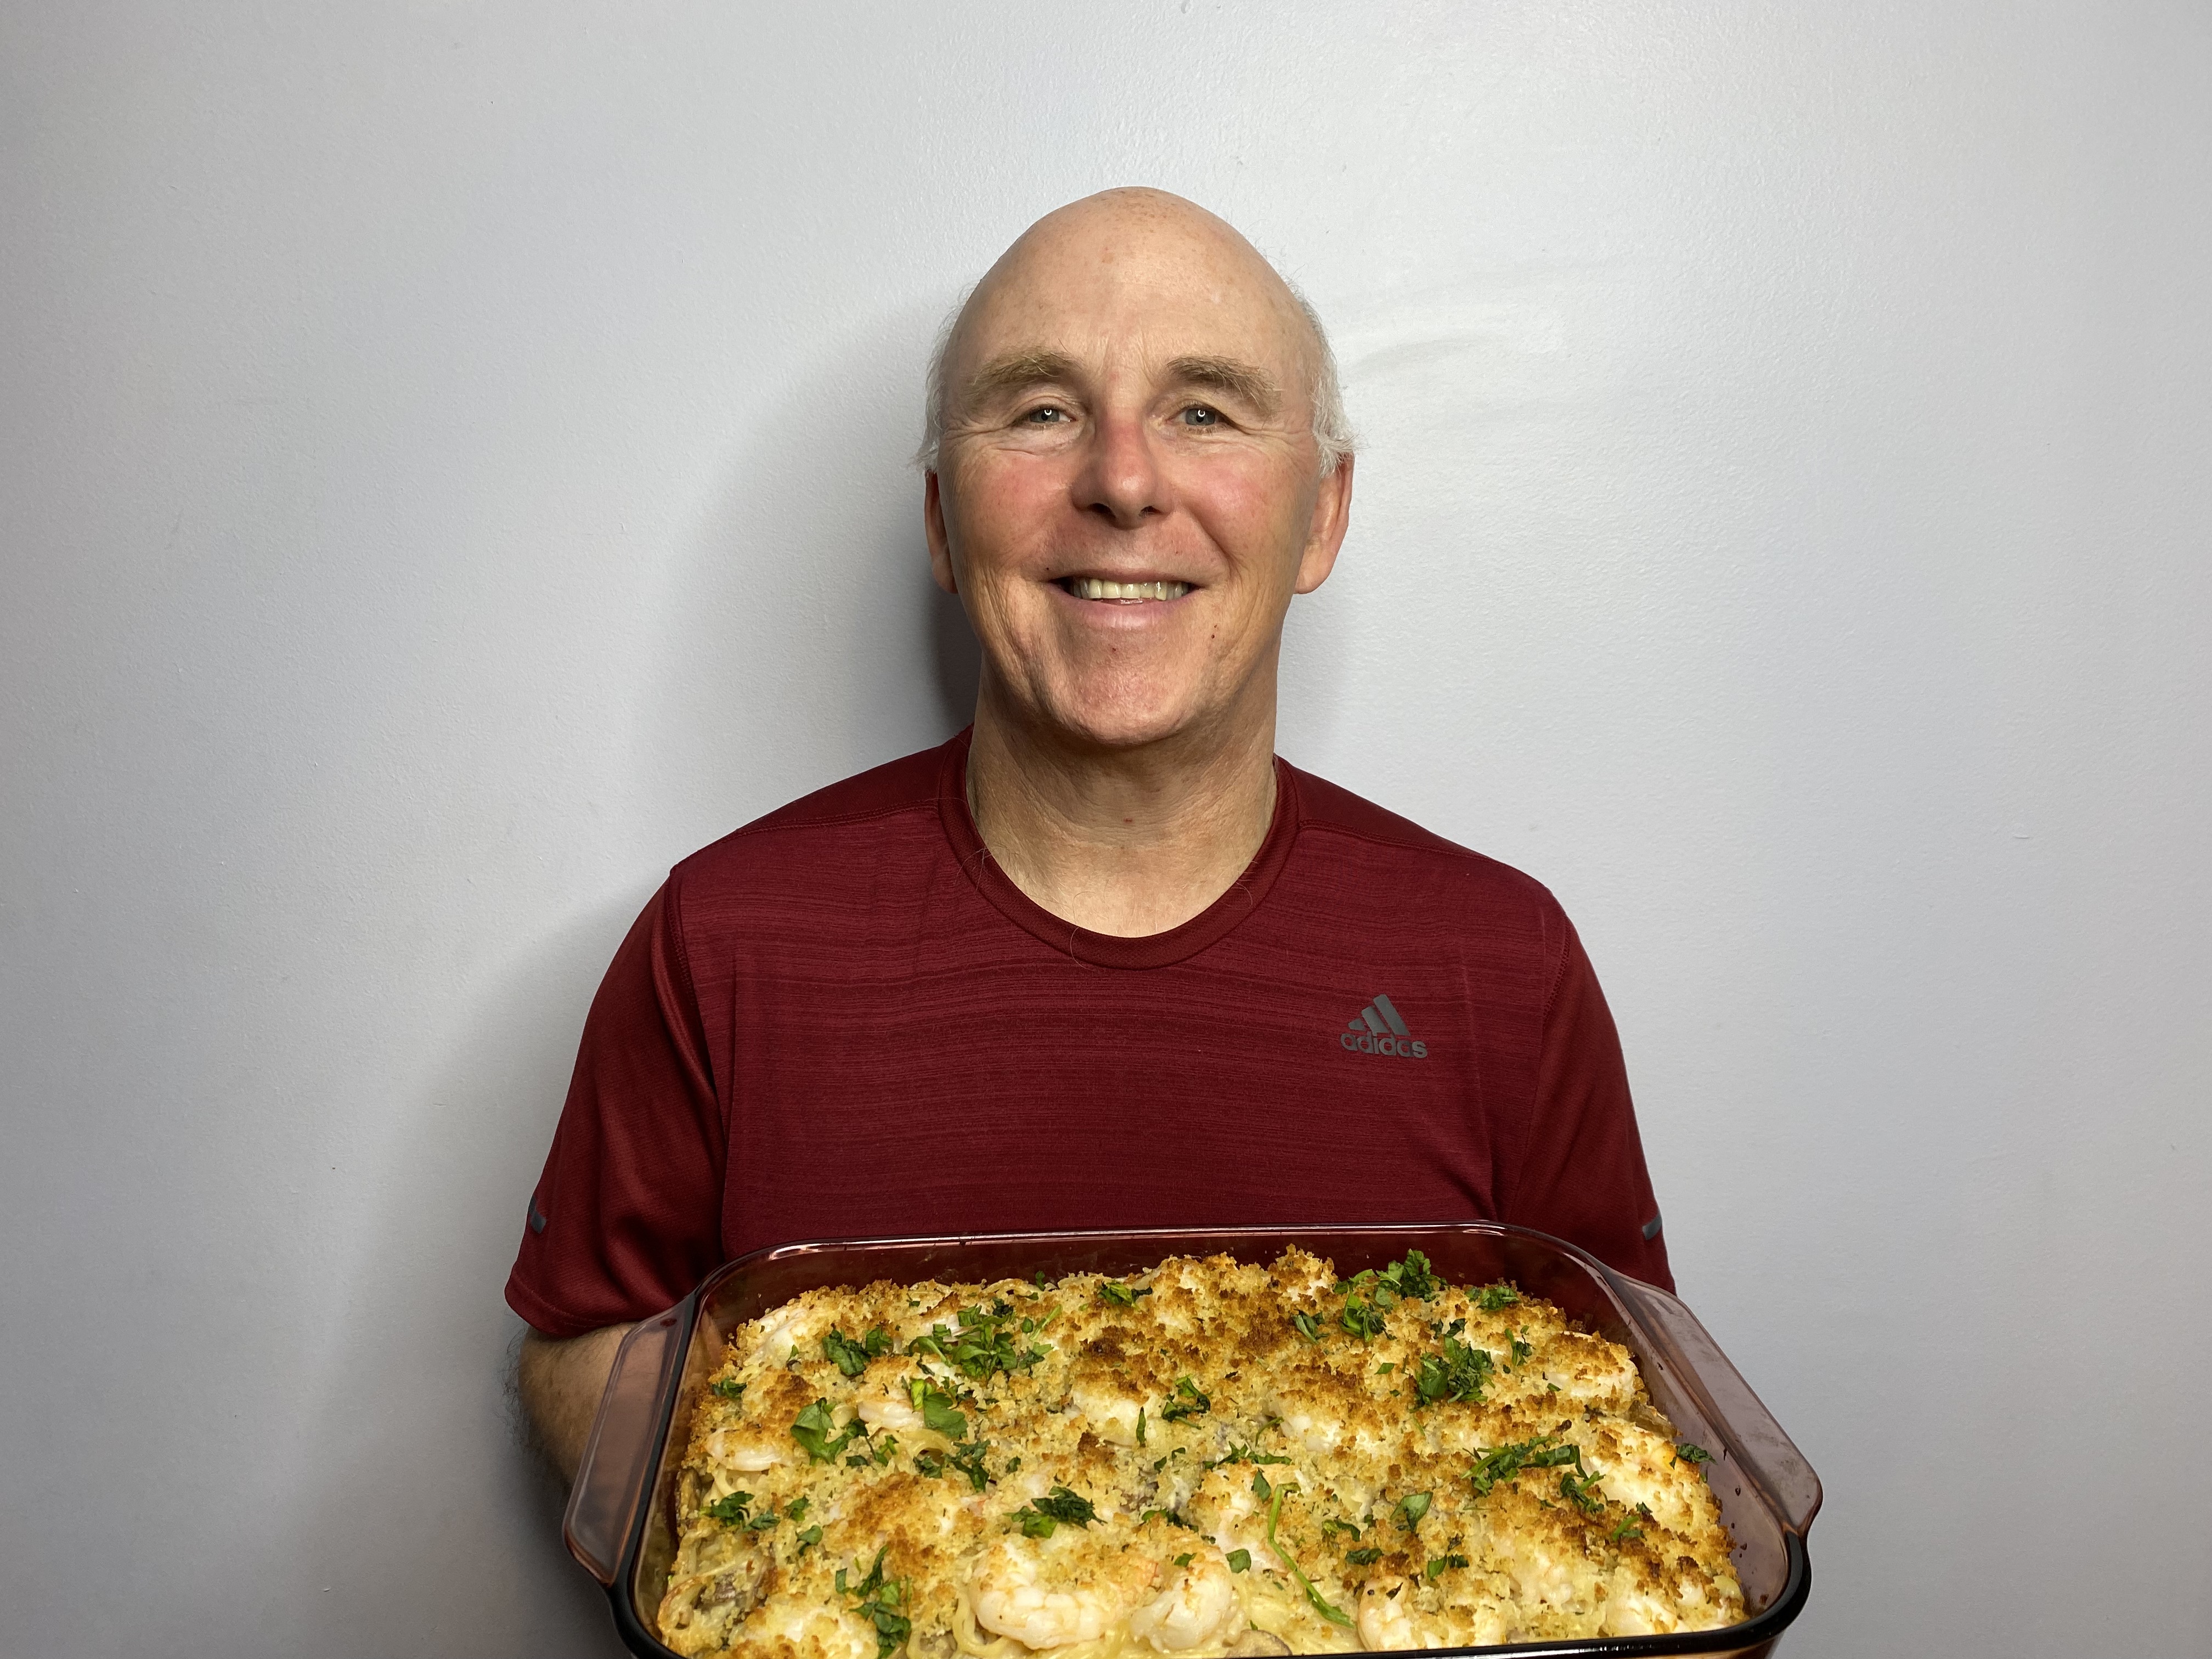 A photo of Chef Rob holding a dish of Baked Shrimp Scampi Tetrazzini Casserole.